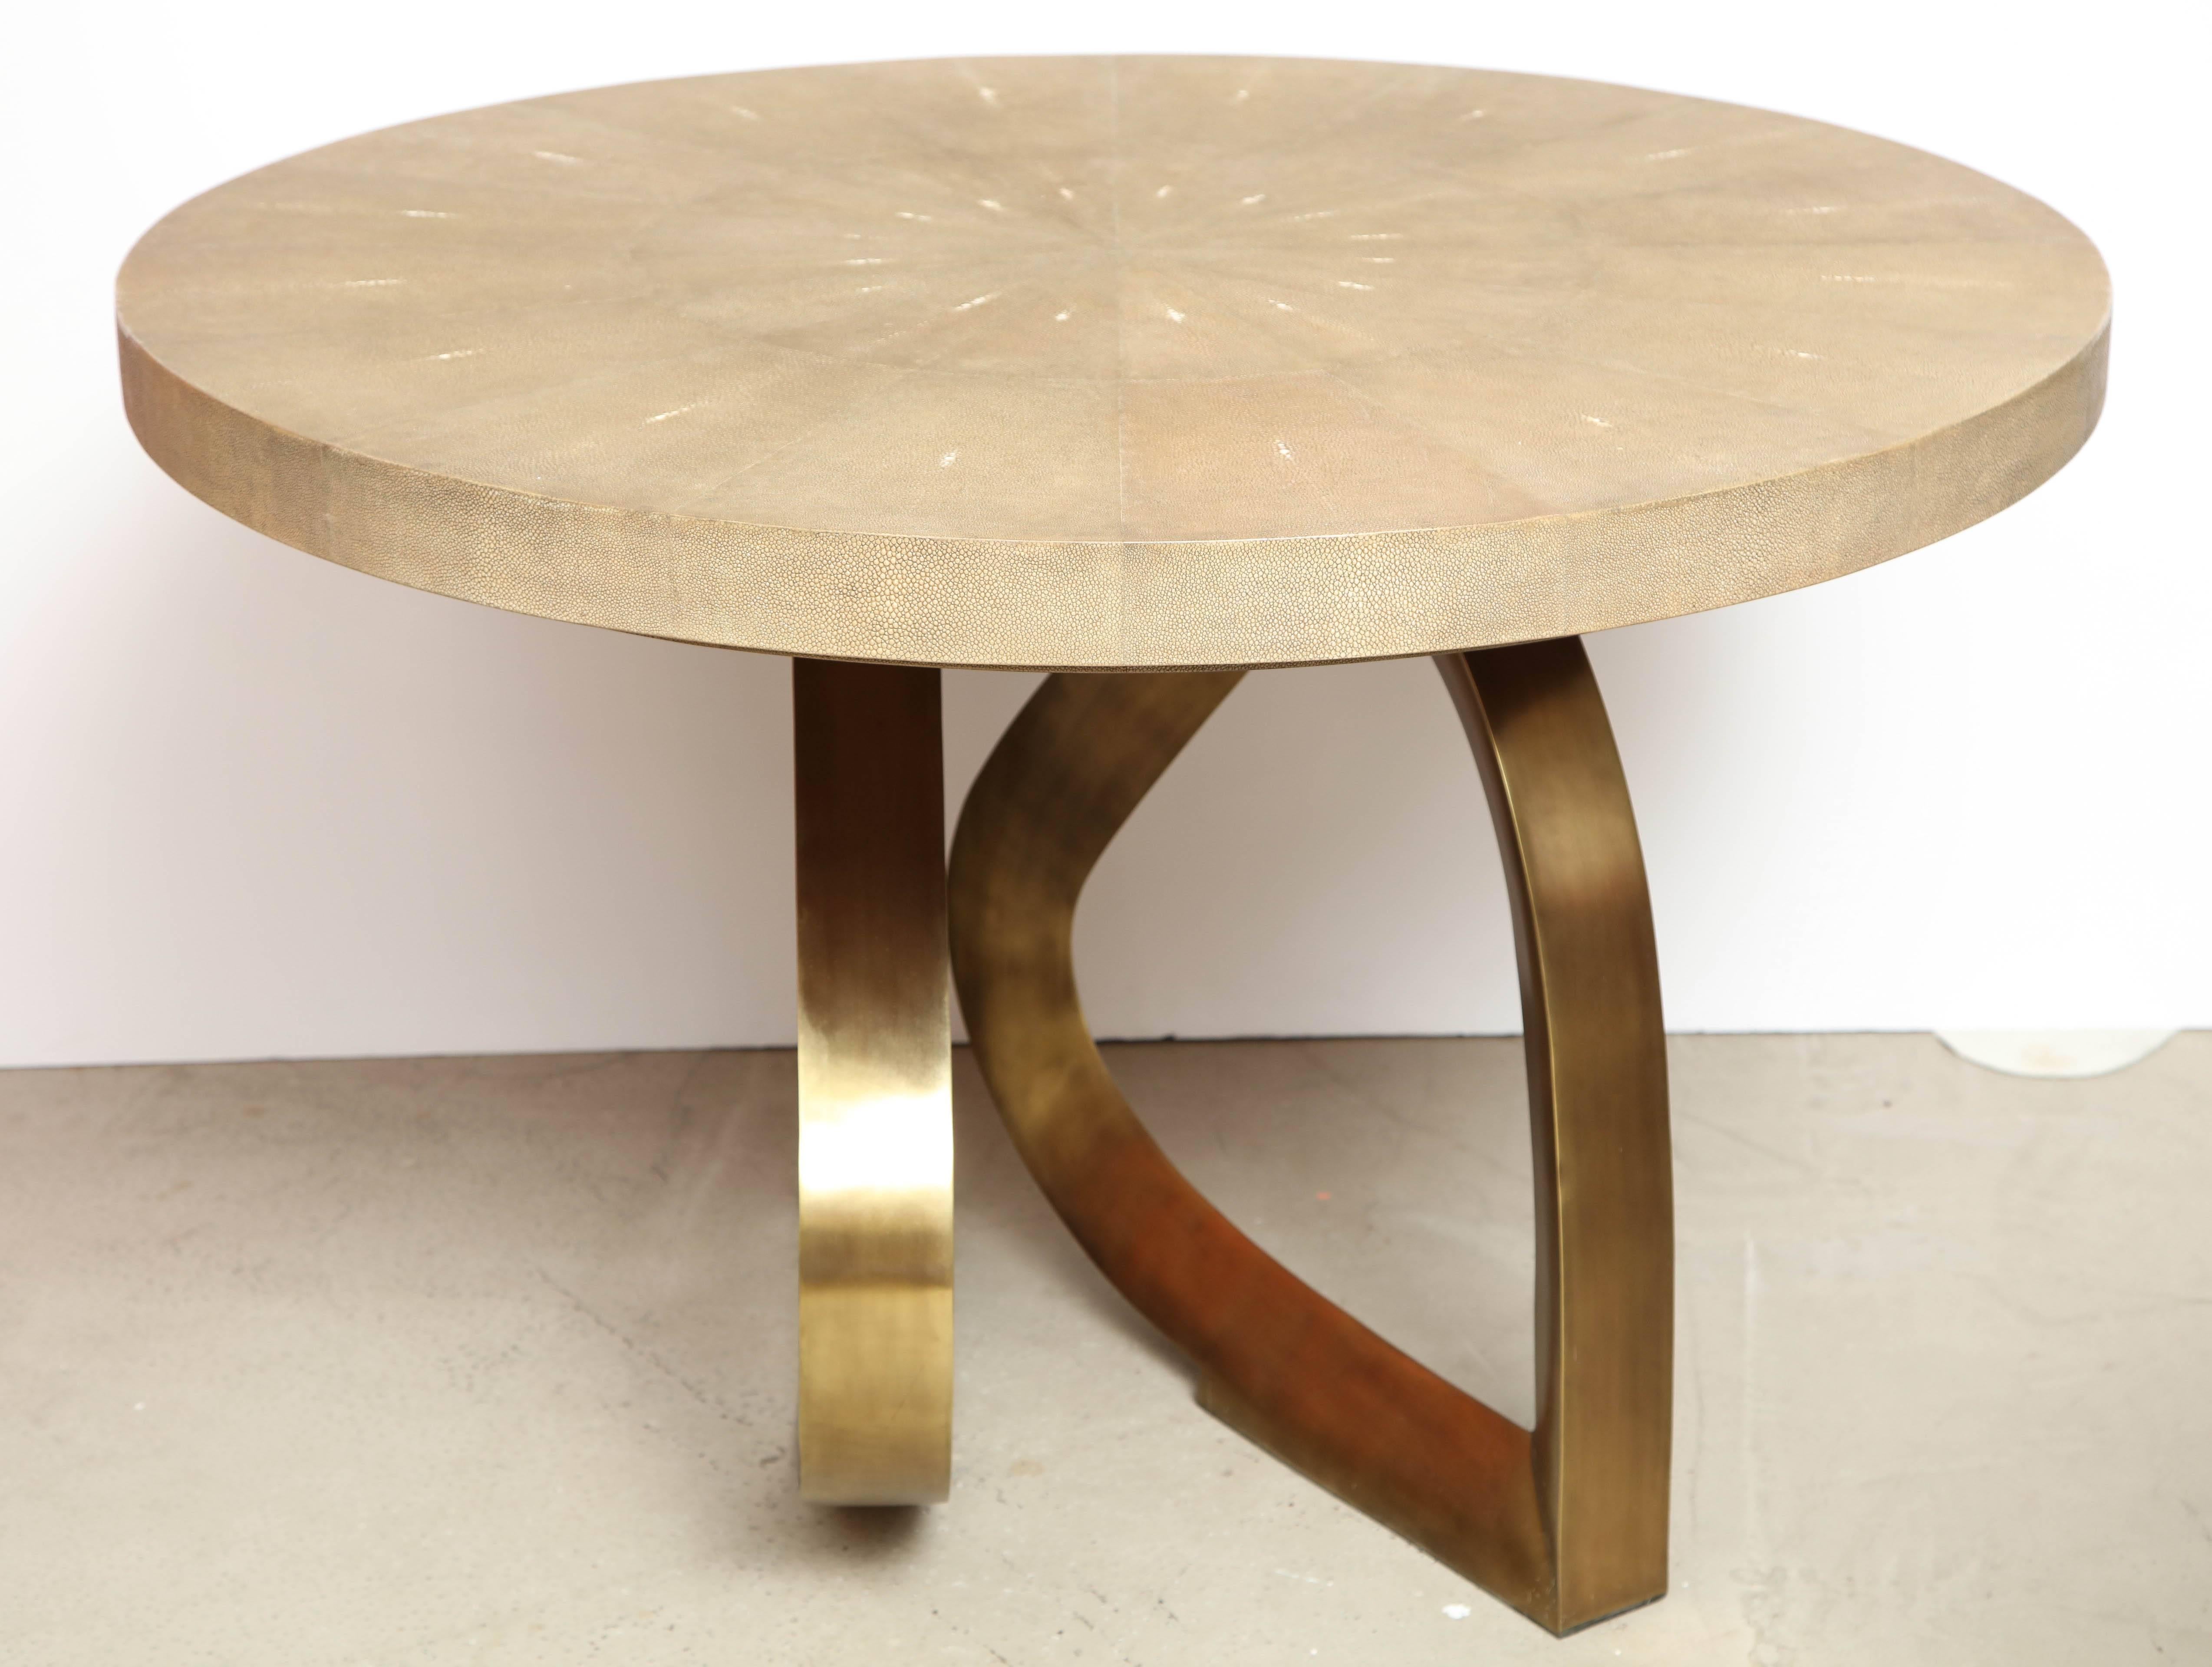 Bronze Shagreen Dining Room Table with Brass Base, Contemporary, Khaki Color Shagreen